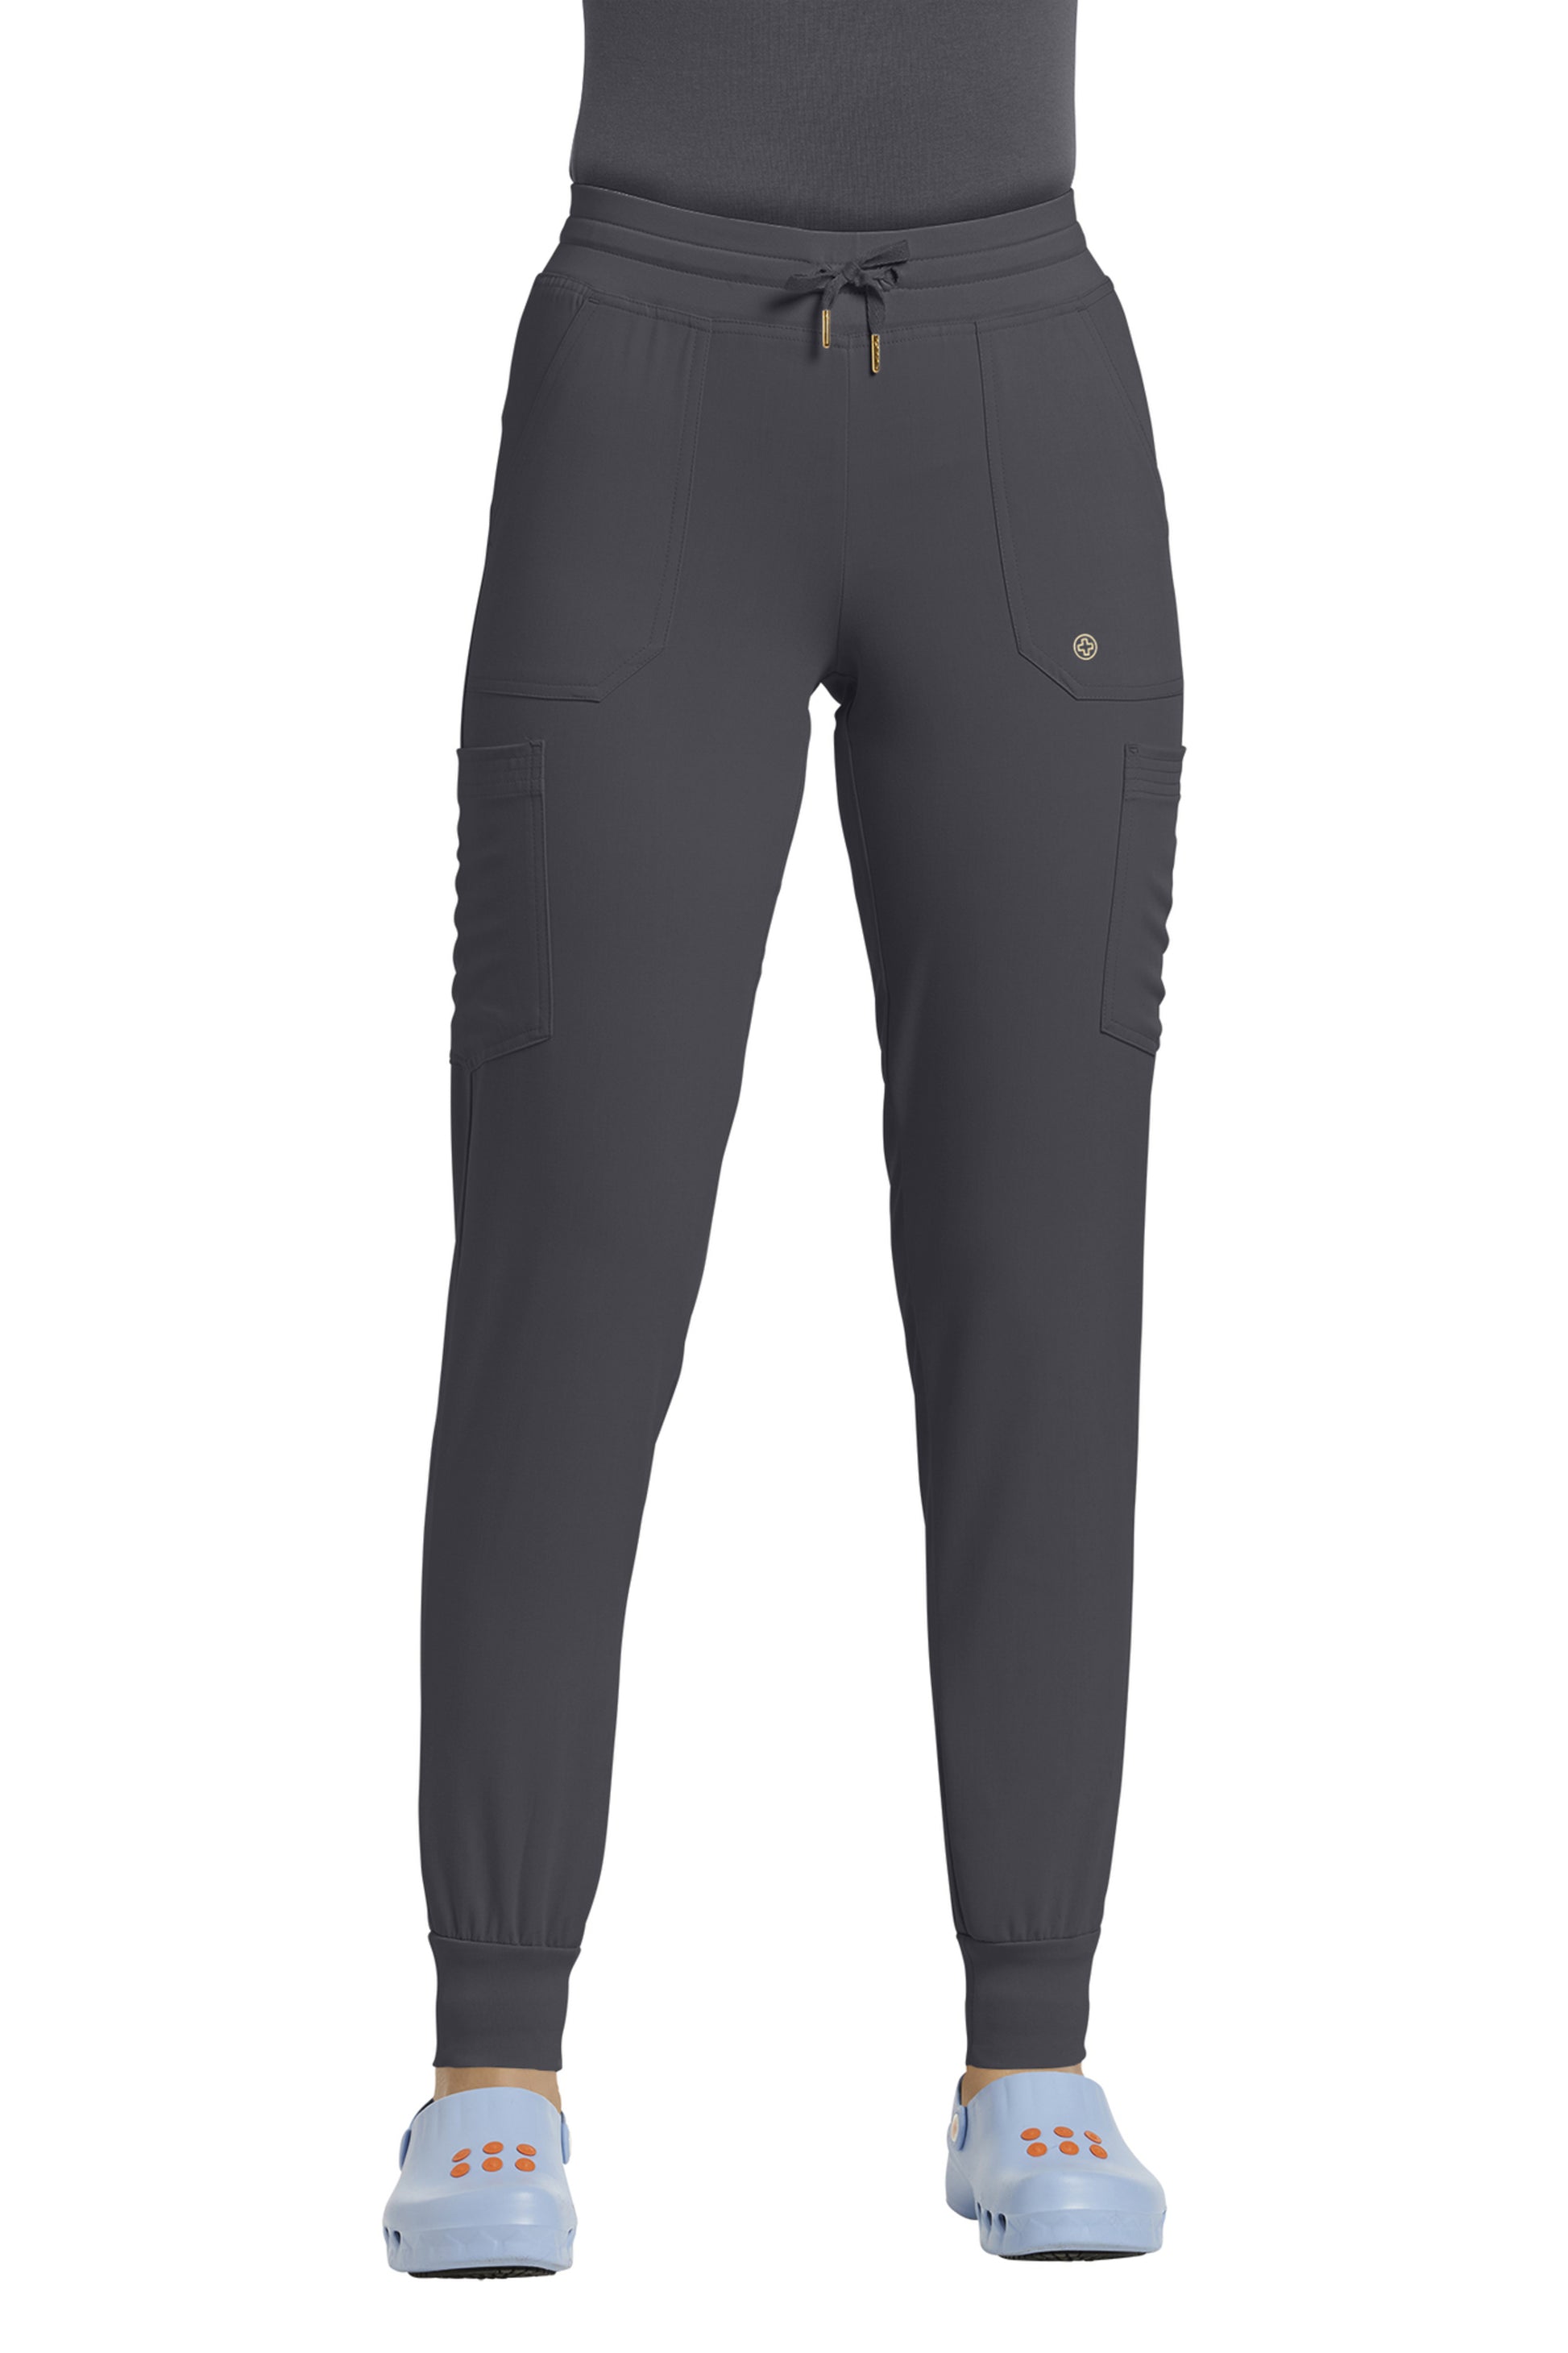 327 Women's Soft Marvella Joggers- Easy Fit